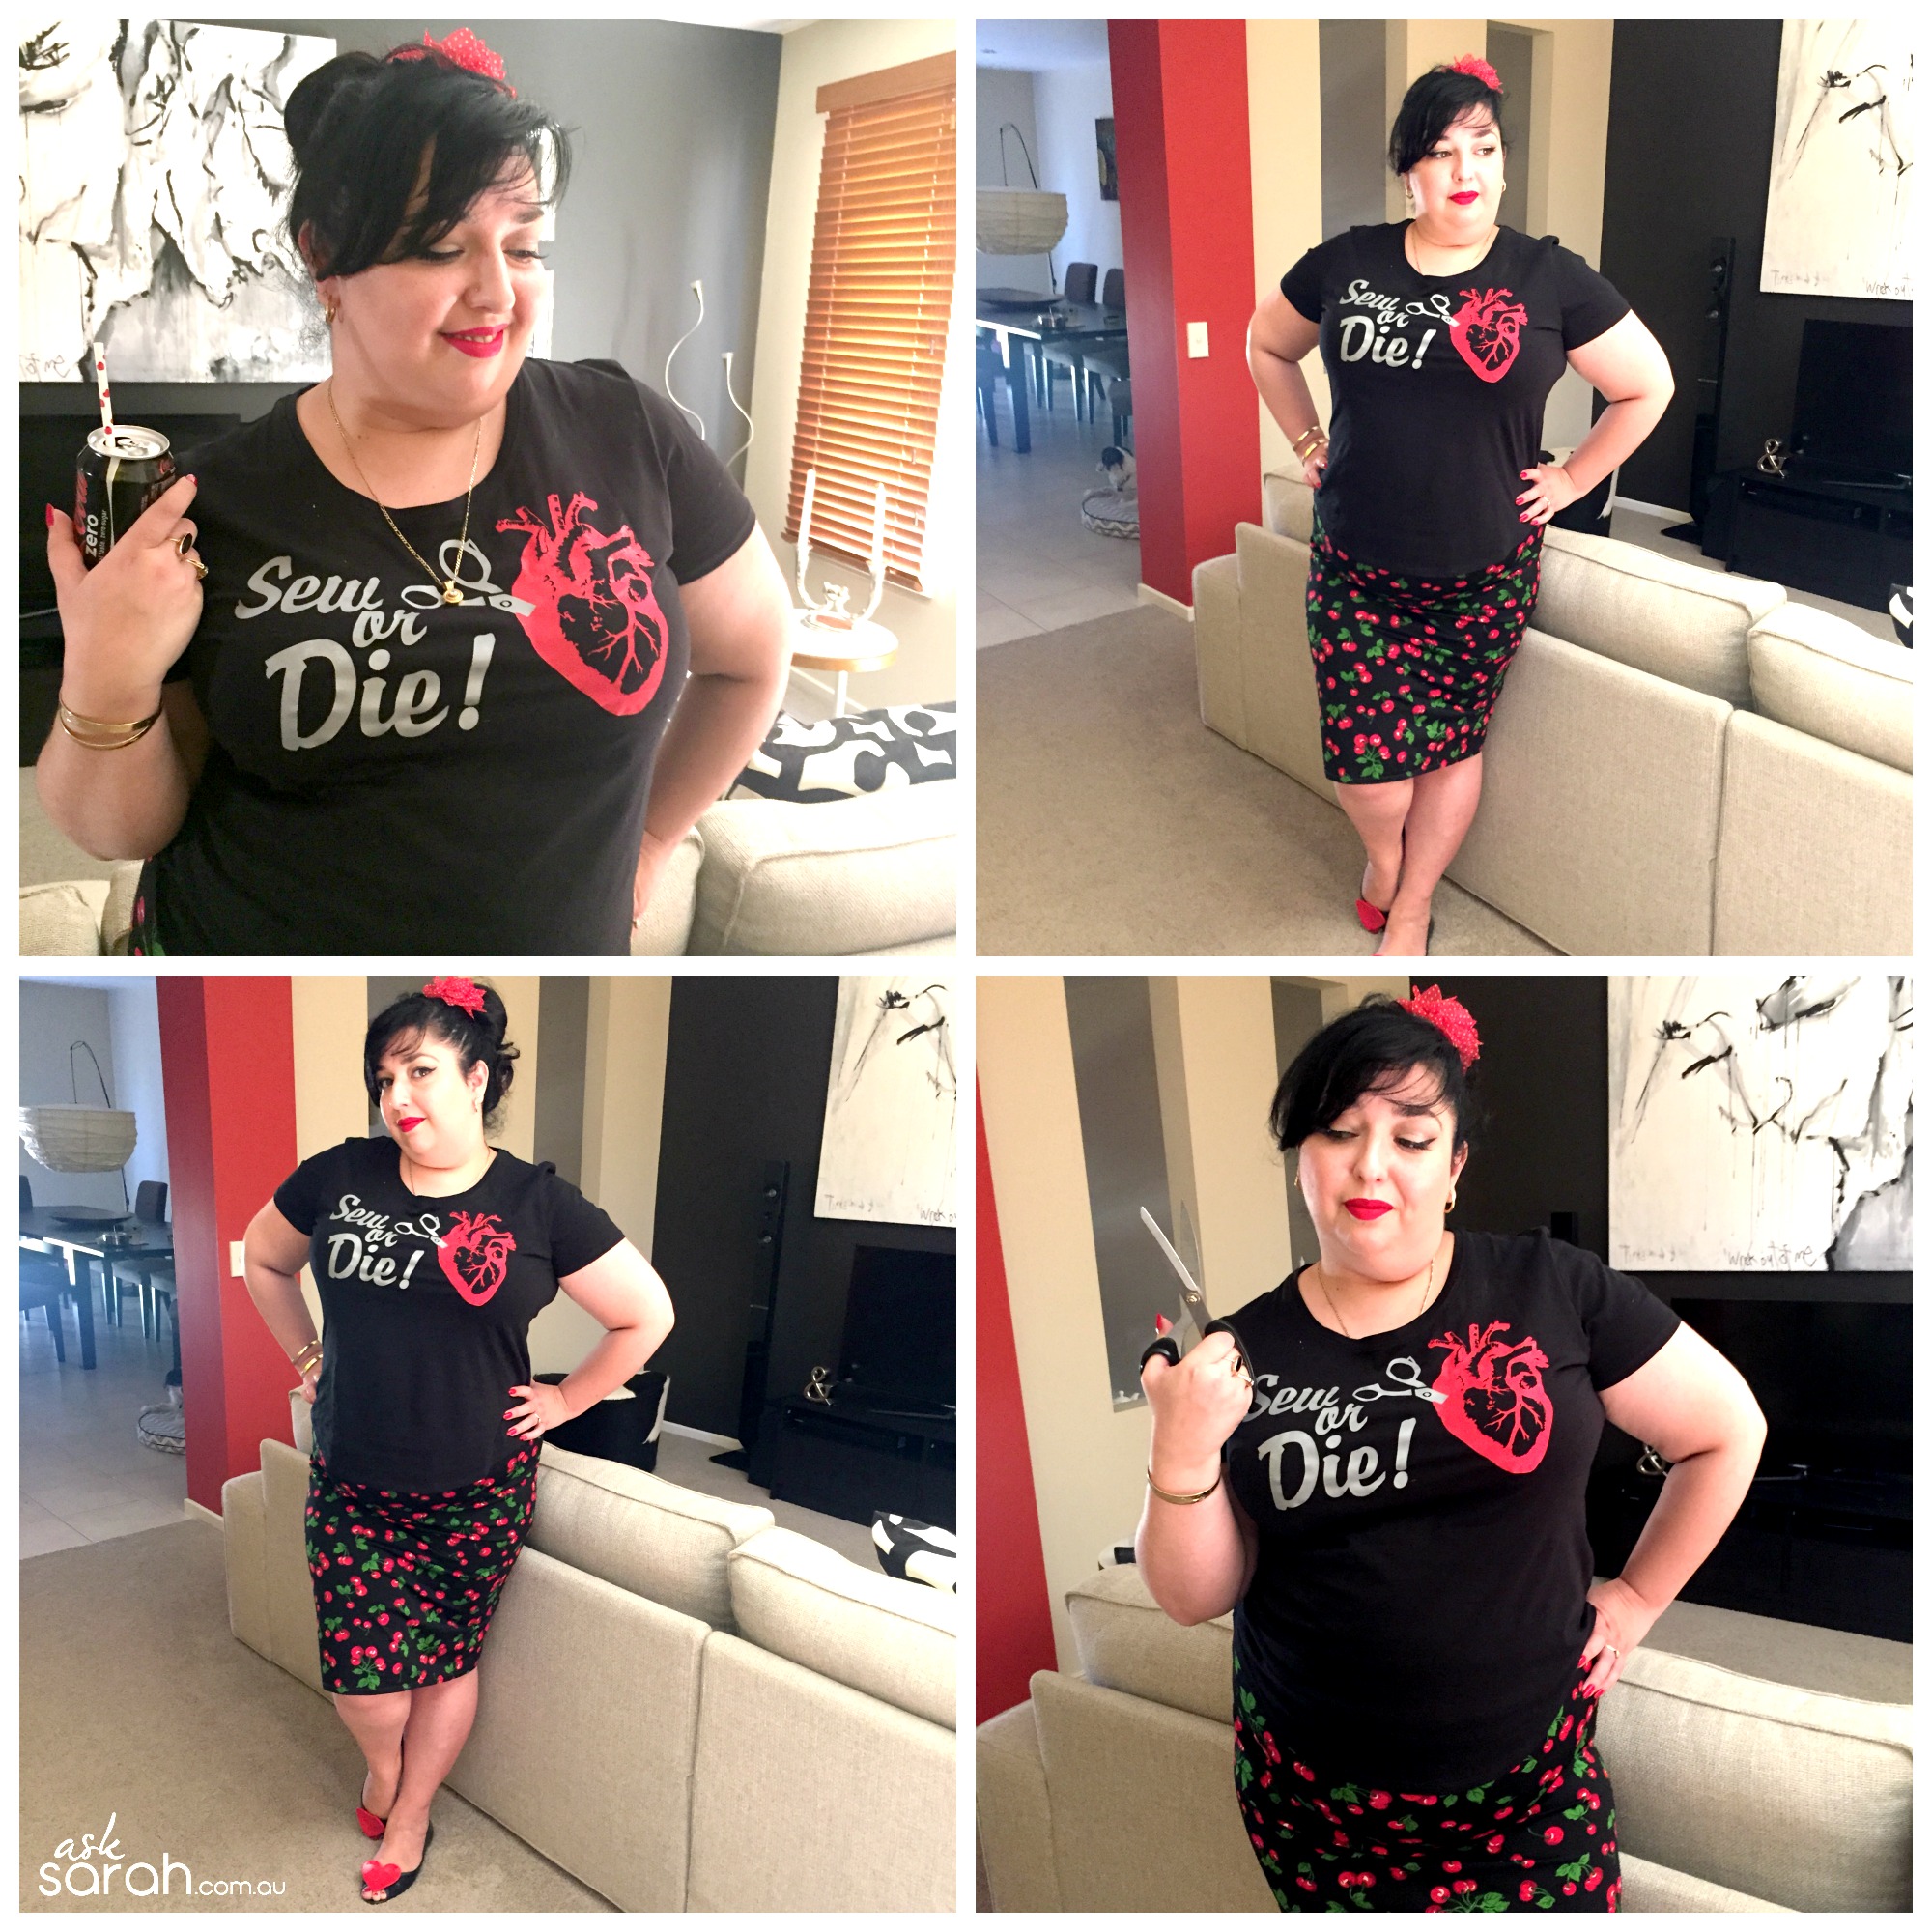 Make: Valentine’s “Sew or Die” Anatomical Heart Tee {FREE .Studio File So You Can Make Your Own!}